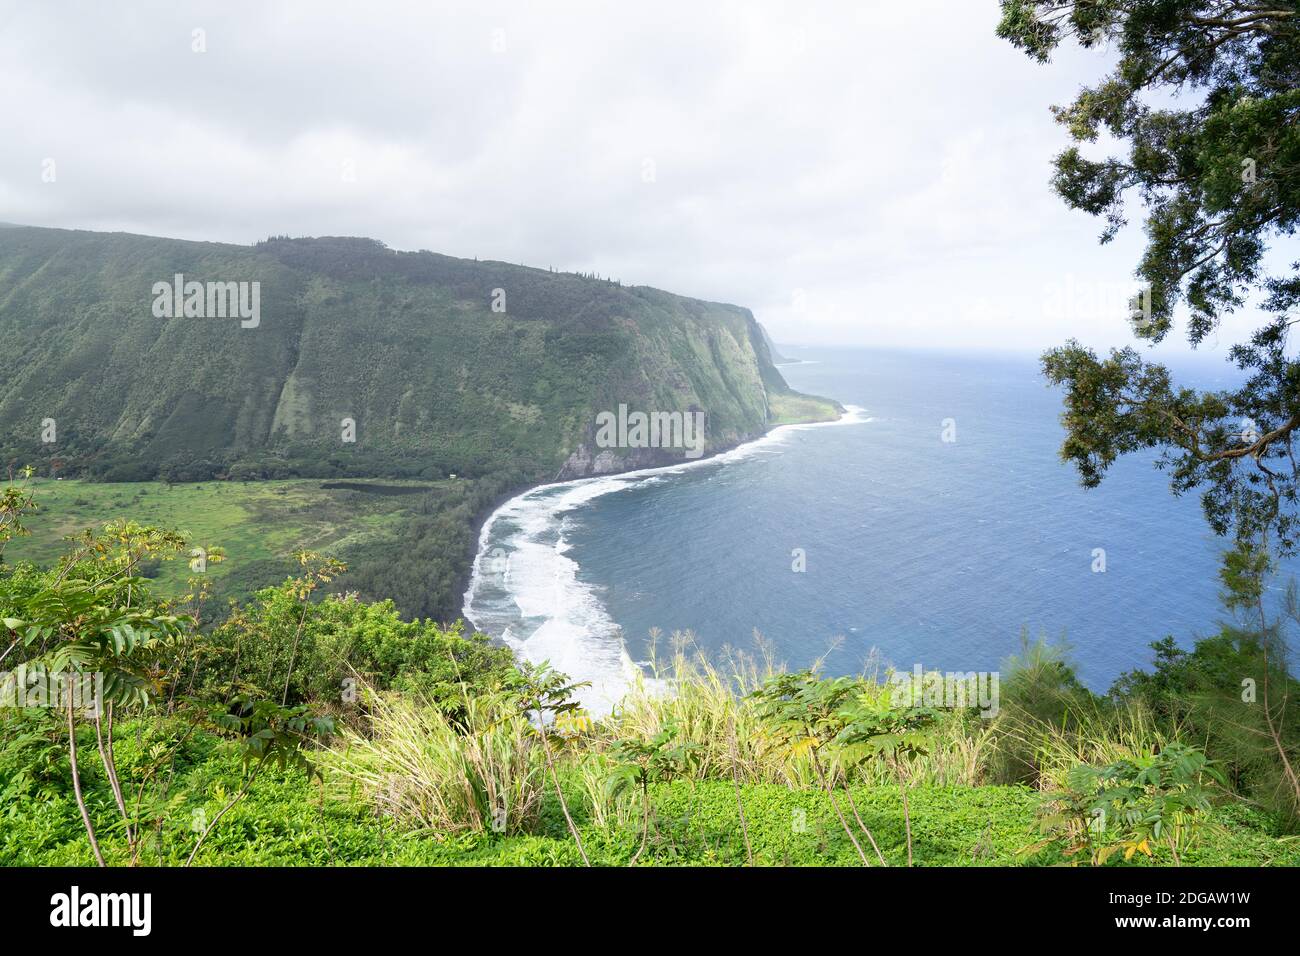 Waipio valley with coast and cliffs, viewed from above on a cloudy day - Hawaii island, Hawaii, USA Stock Photo